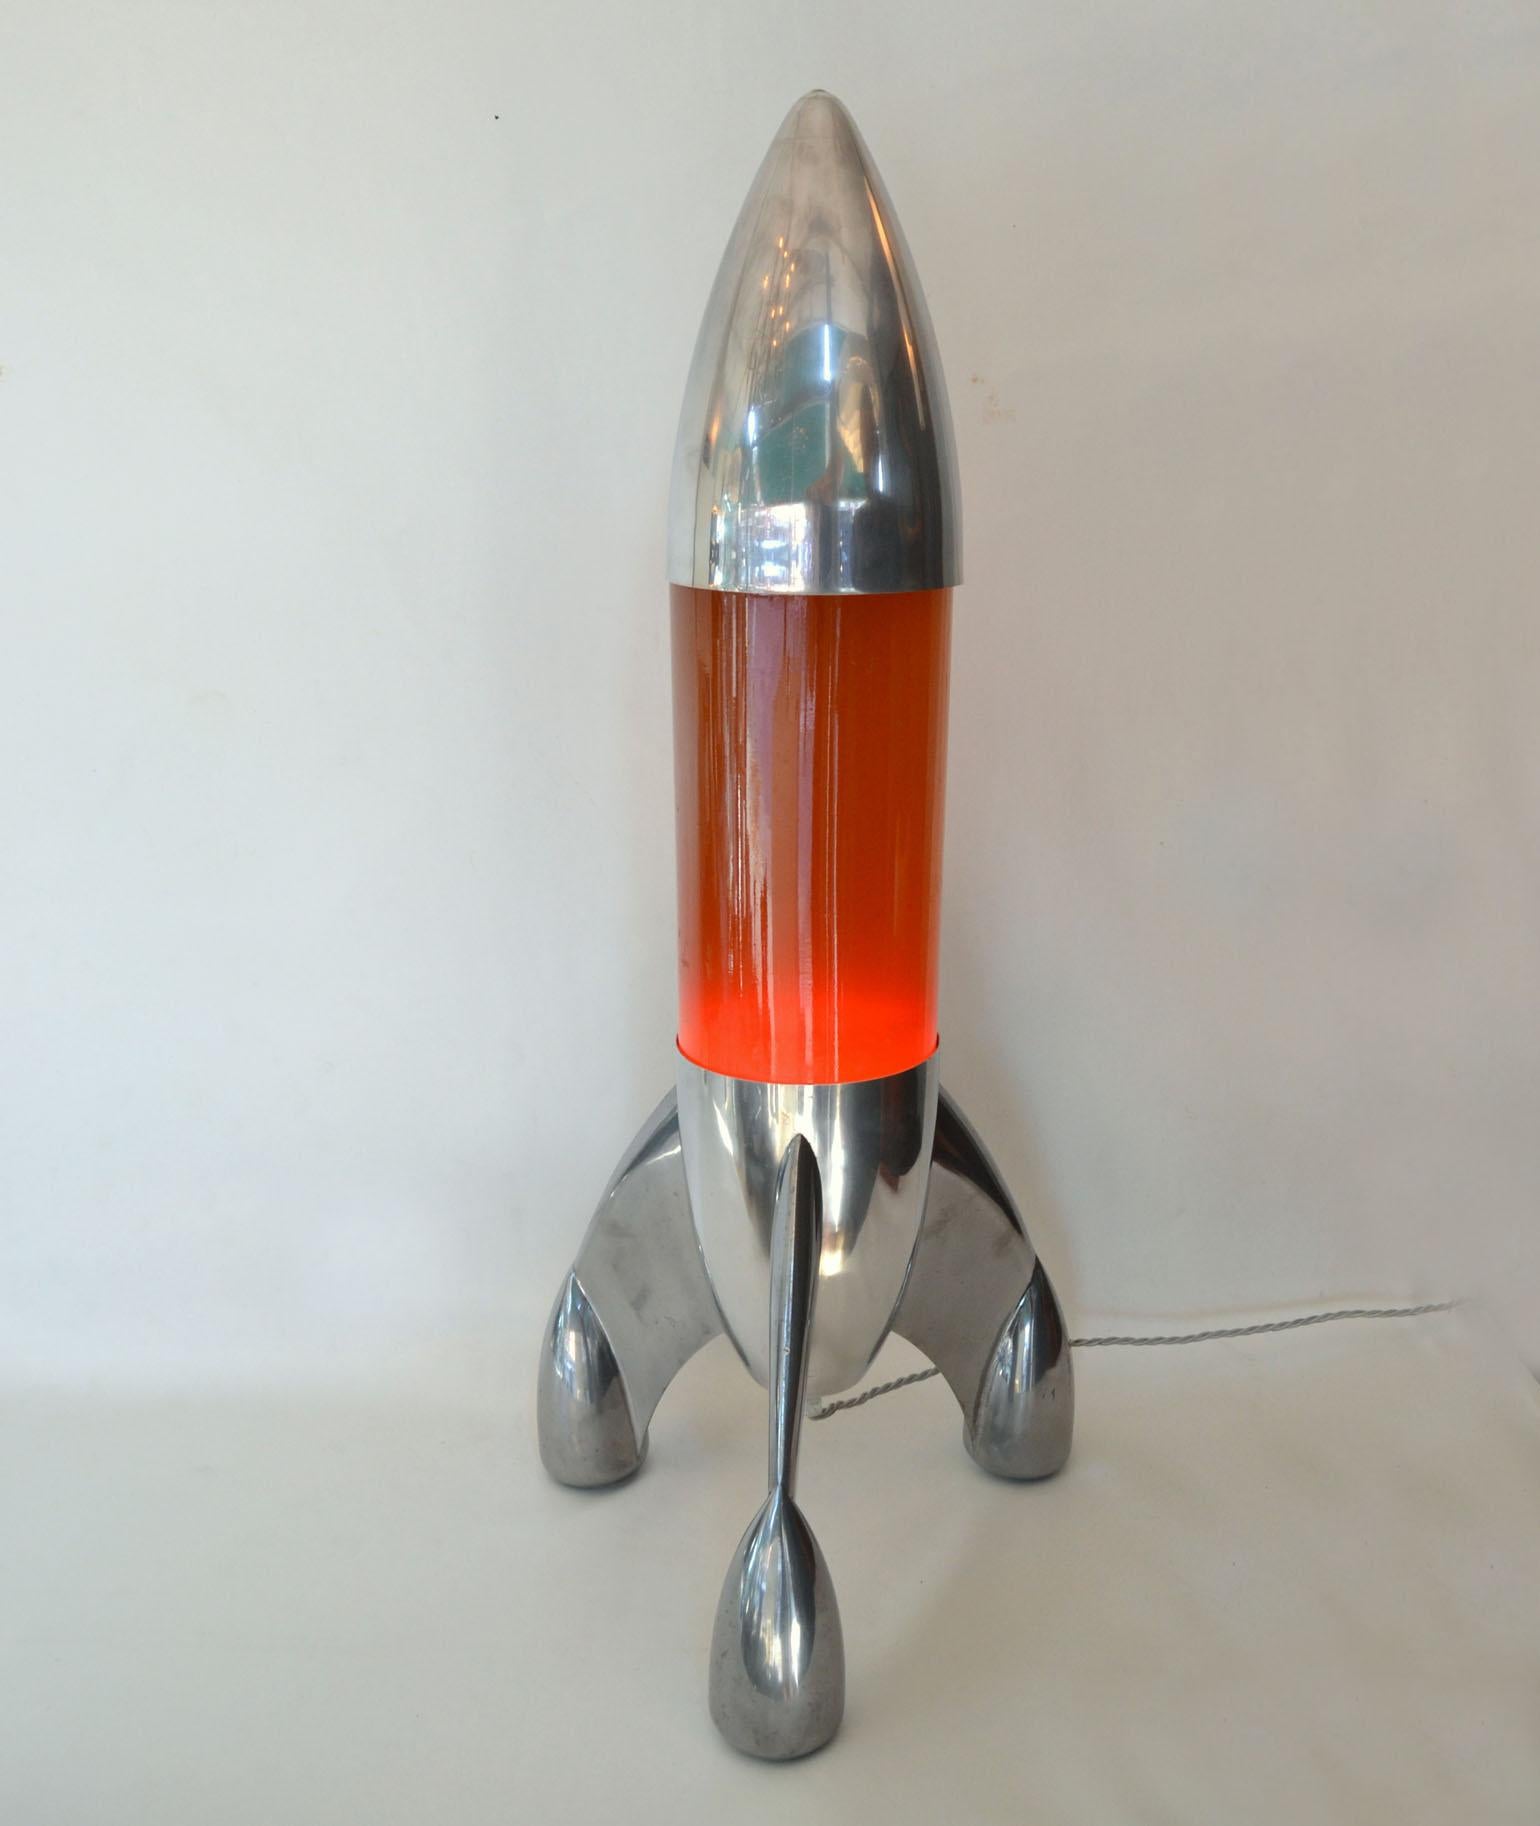 This is an early Classic lava rocket lamp by Edward Craven Walker, inventor and founder of Mathmos. The first and original lava lamp, it's the largest as we know them with a height of 80 cm and width 35 cm.
The Mathmos astro is a pop design Classic